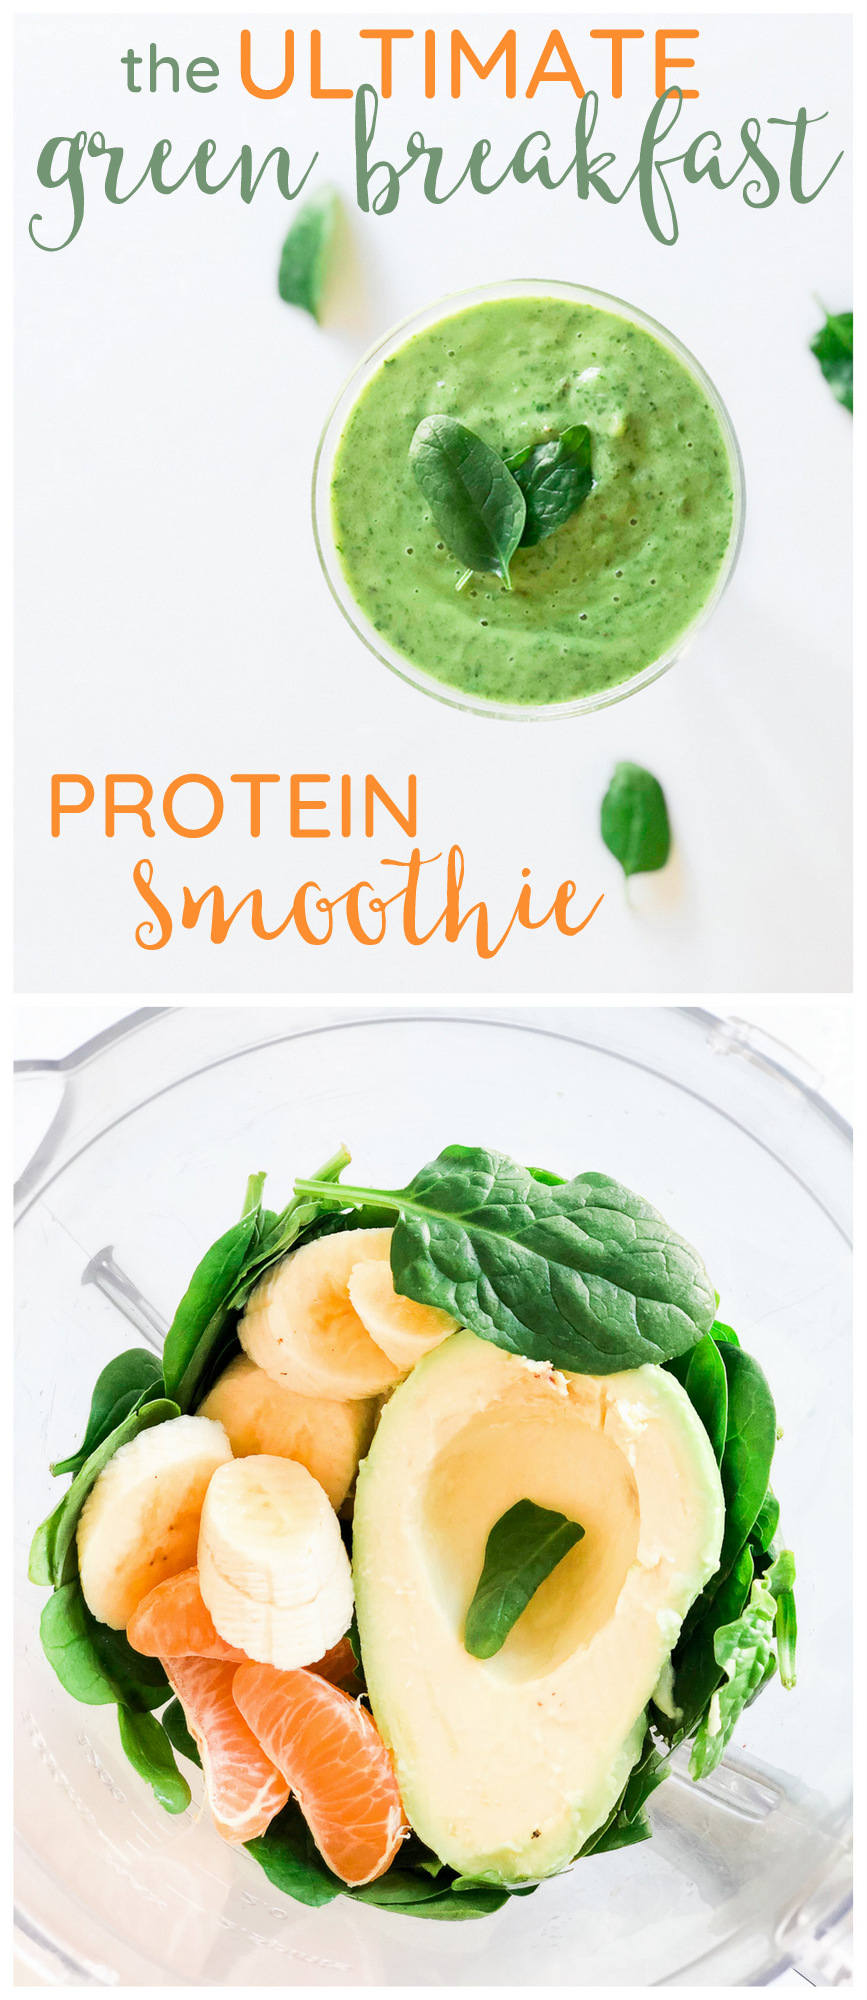 The Ultimate Green Protein avocado breakfast smoothie recipe